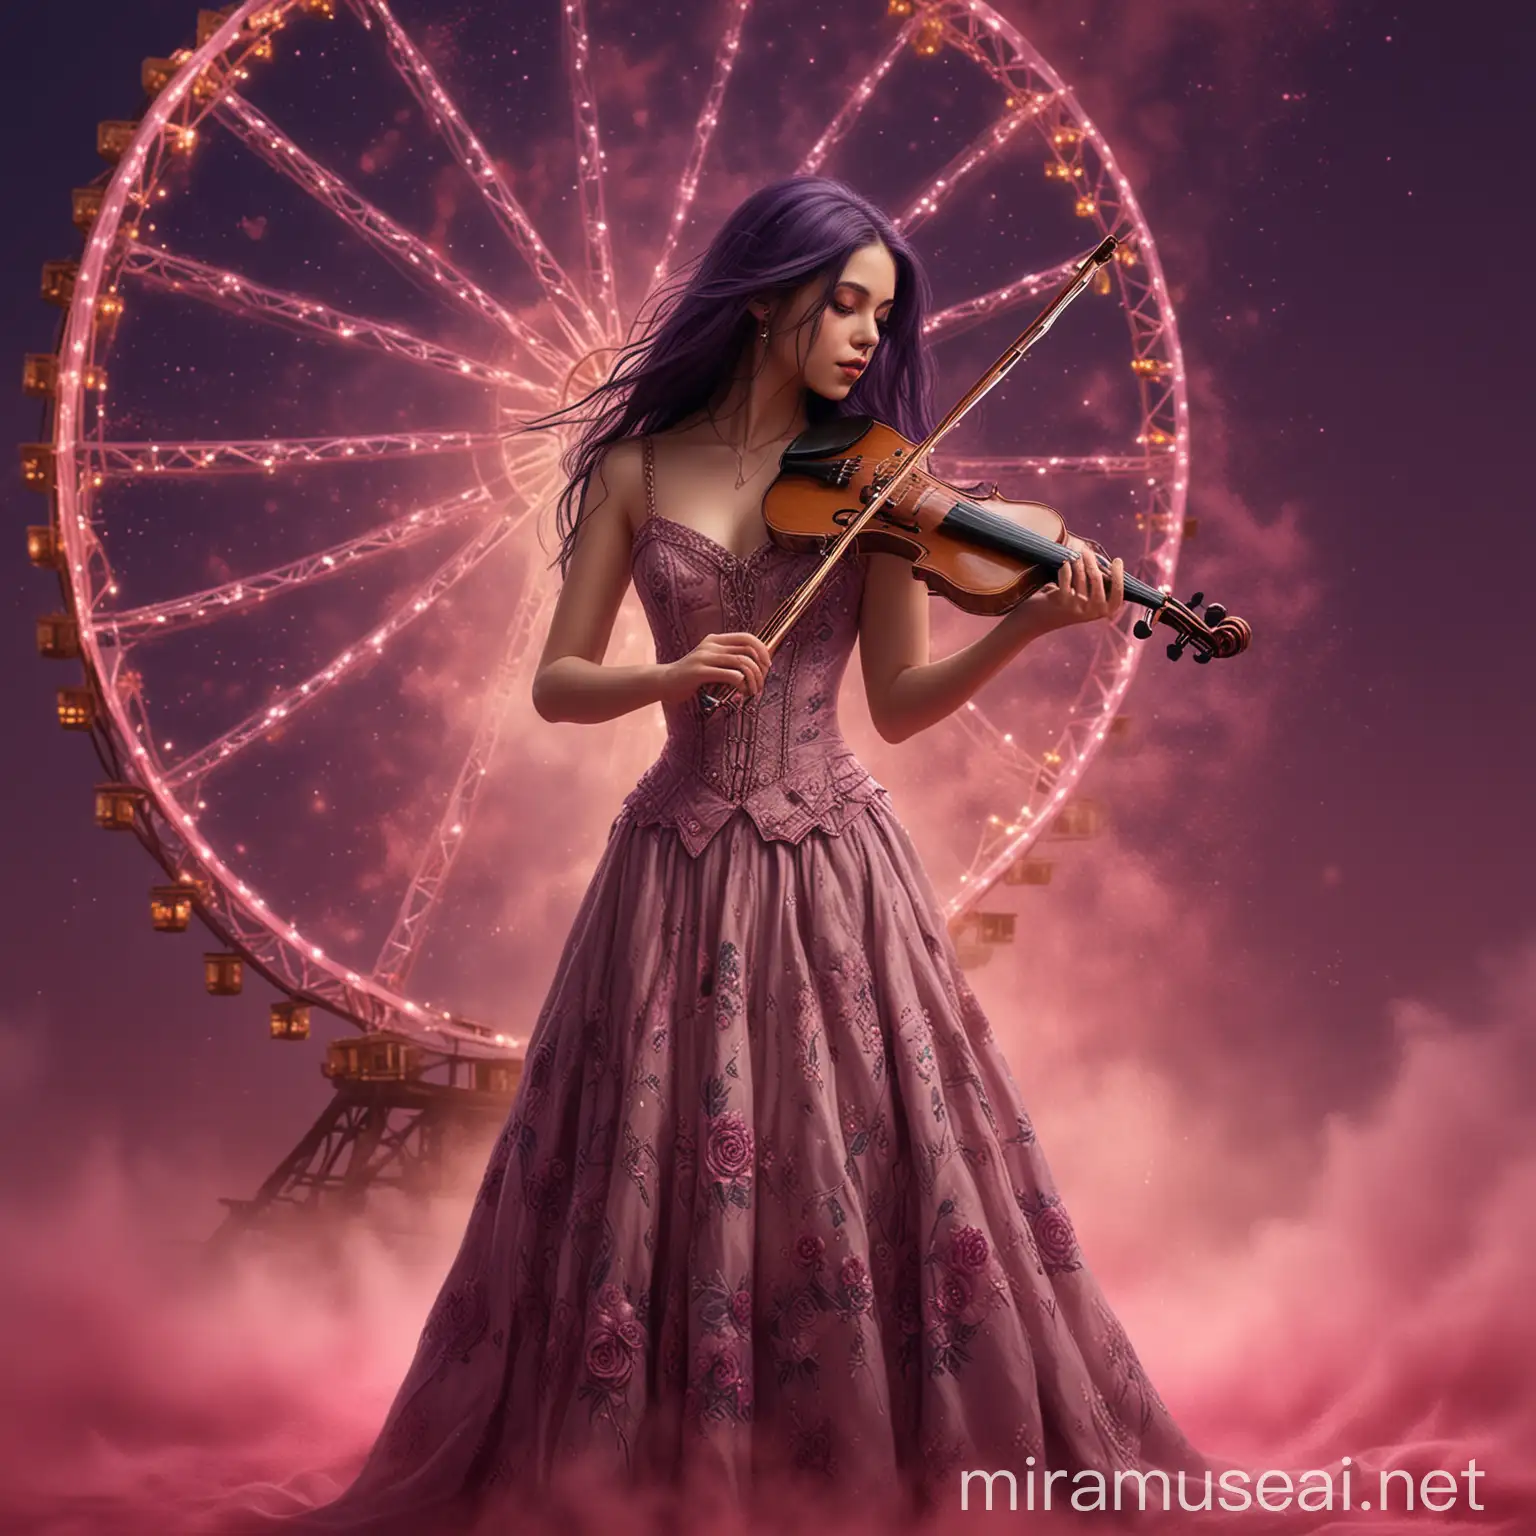 Elegant Woman Playing Violin on Pink Dust with Ferris Wheel Background